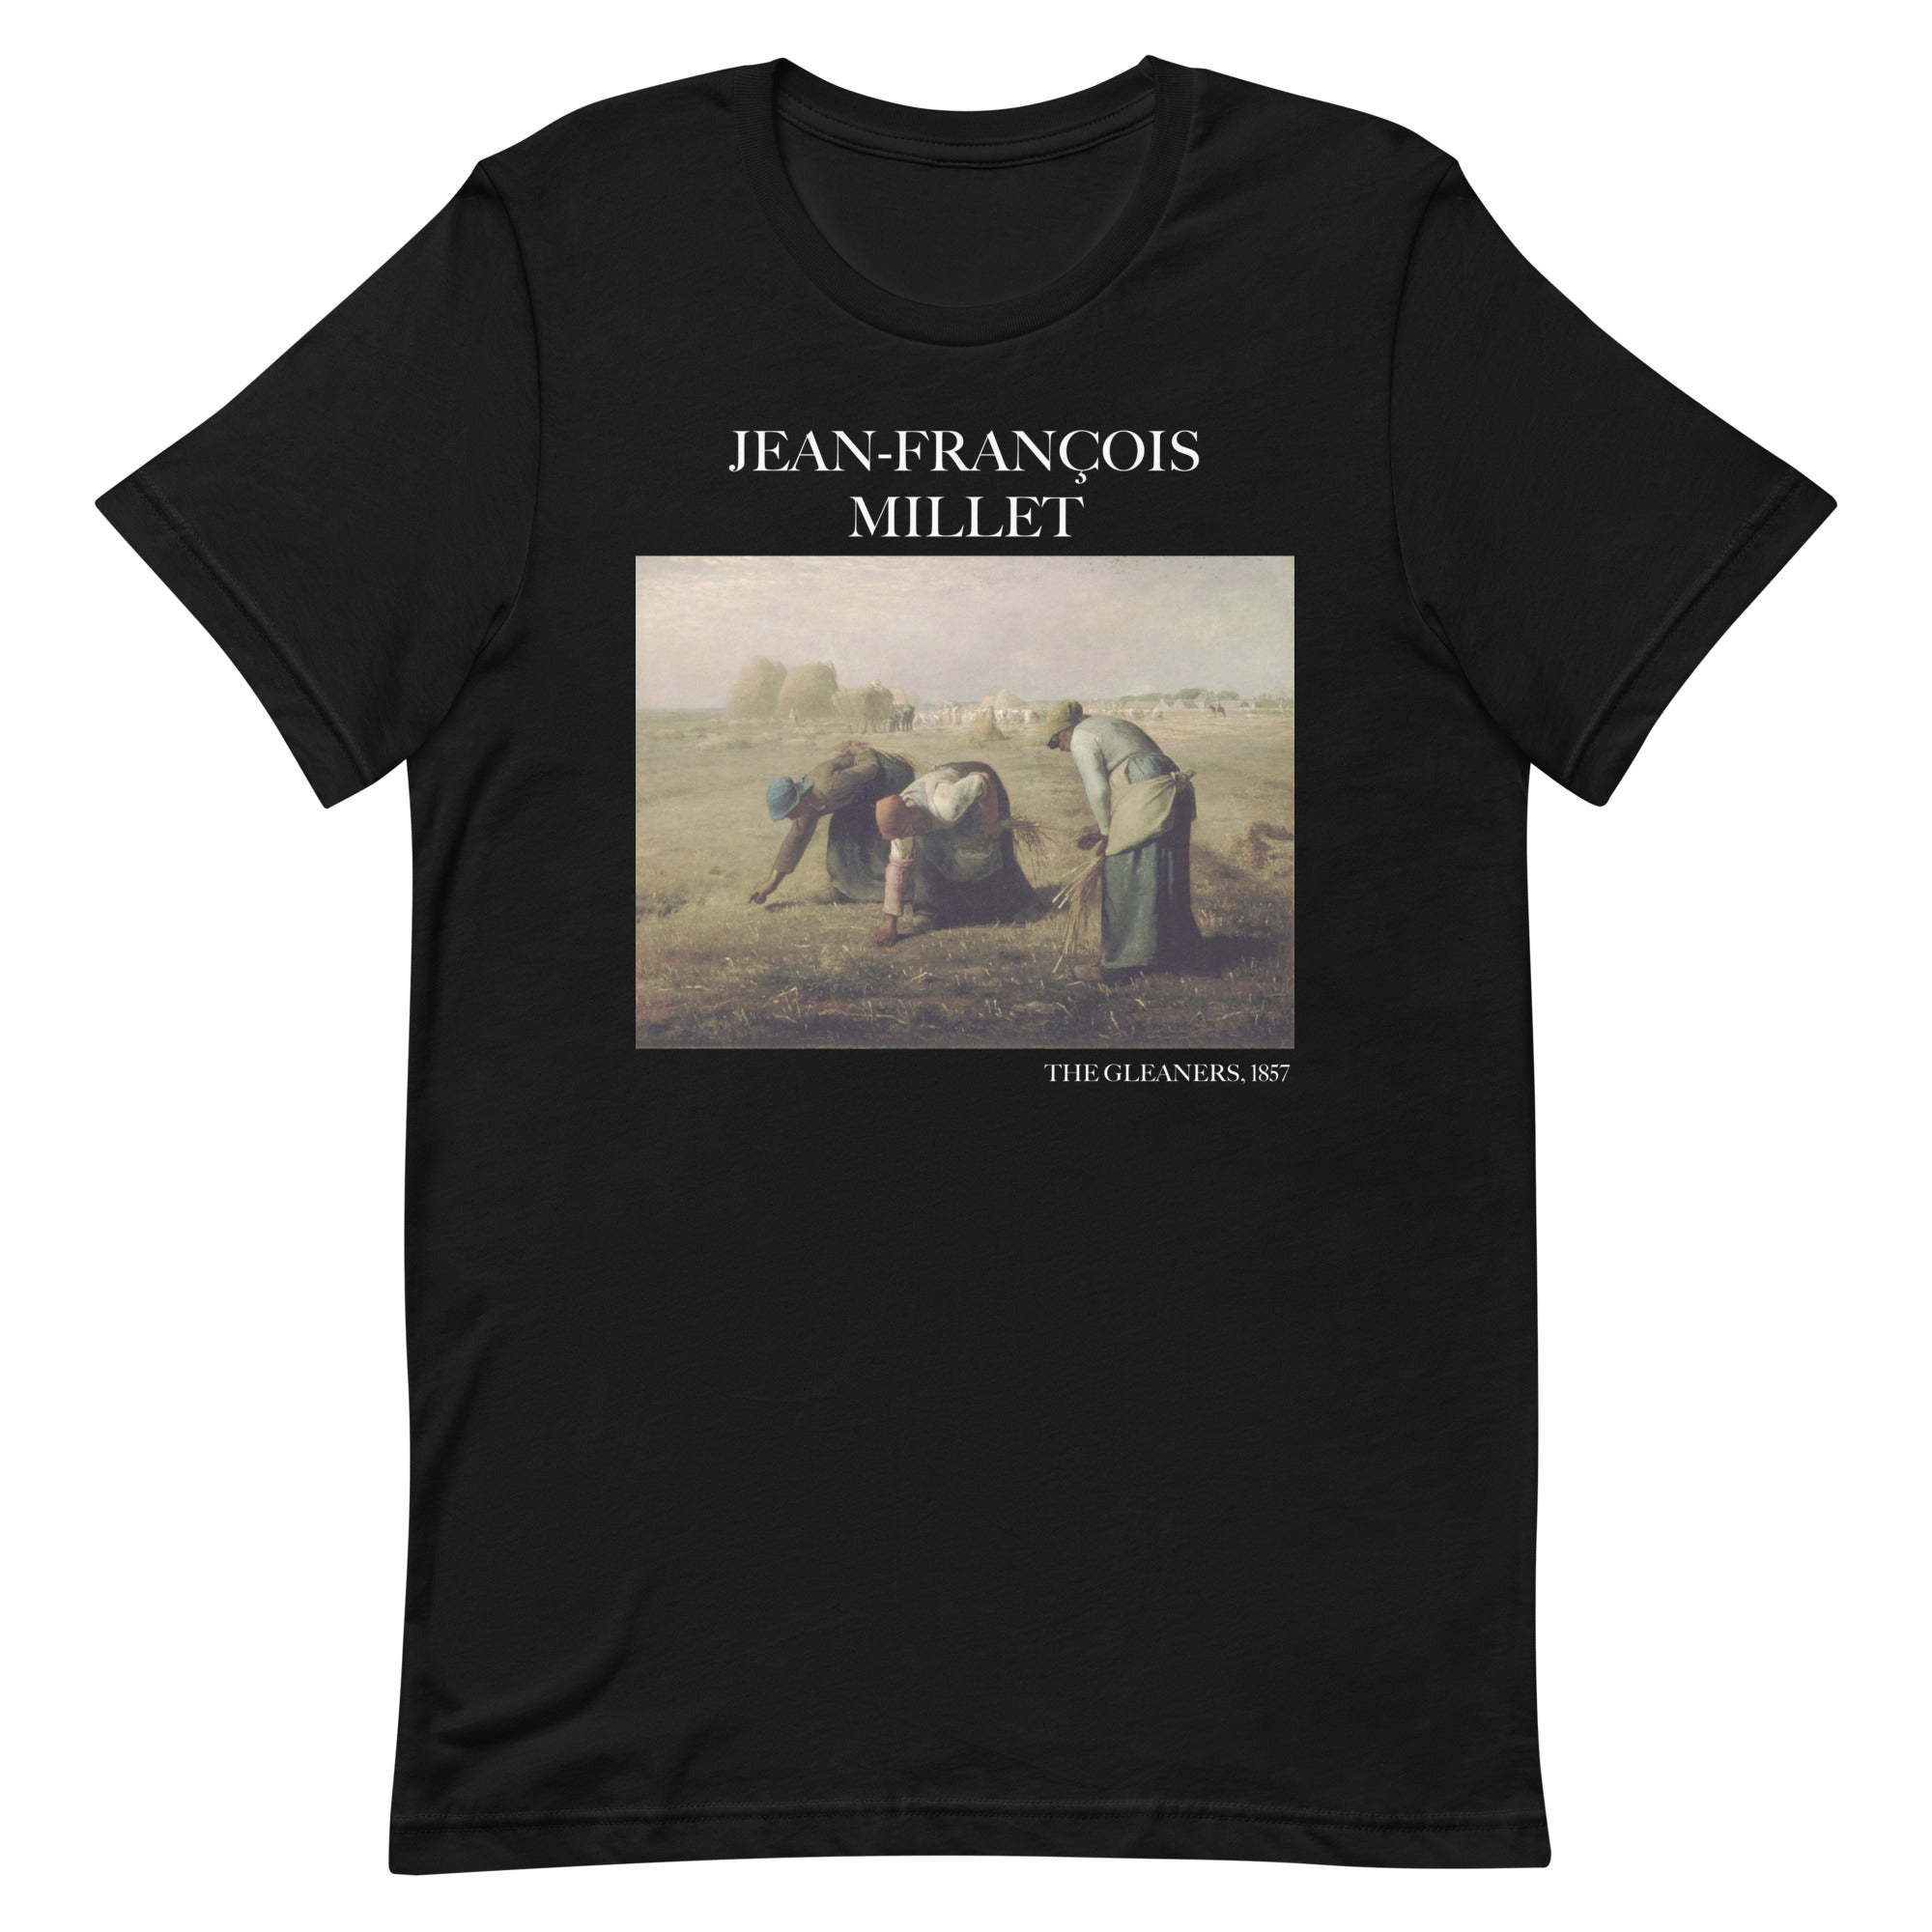 Jean-François Millet 'The Gleaners' Famous Painting T-Shirt | Unisex Classic Art Tee